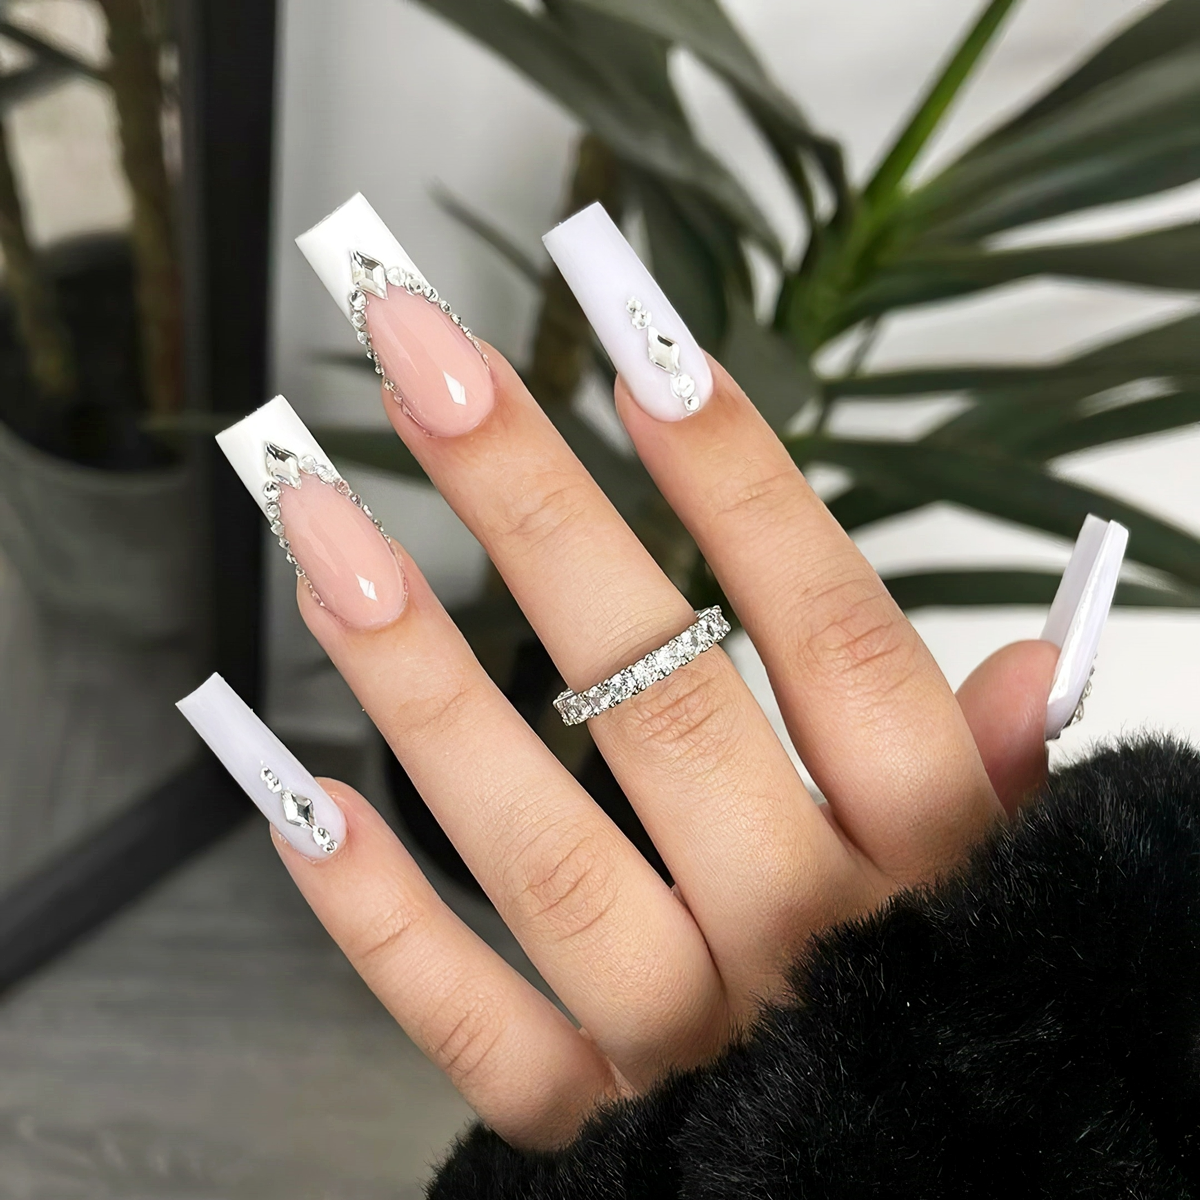 winter nagel ideen french nails mit strass chiconails